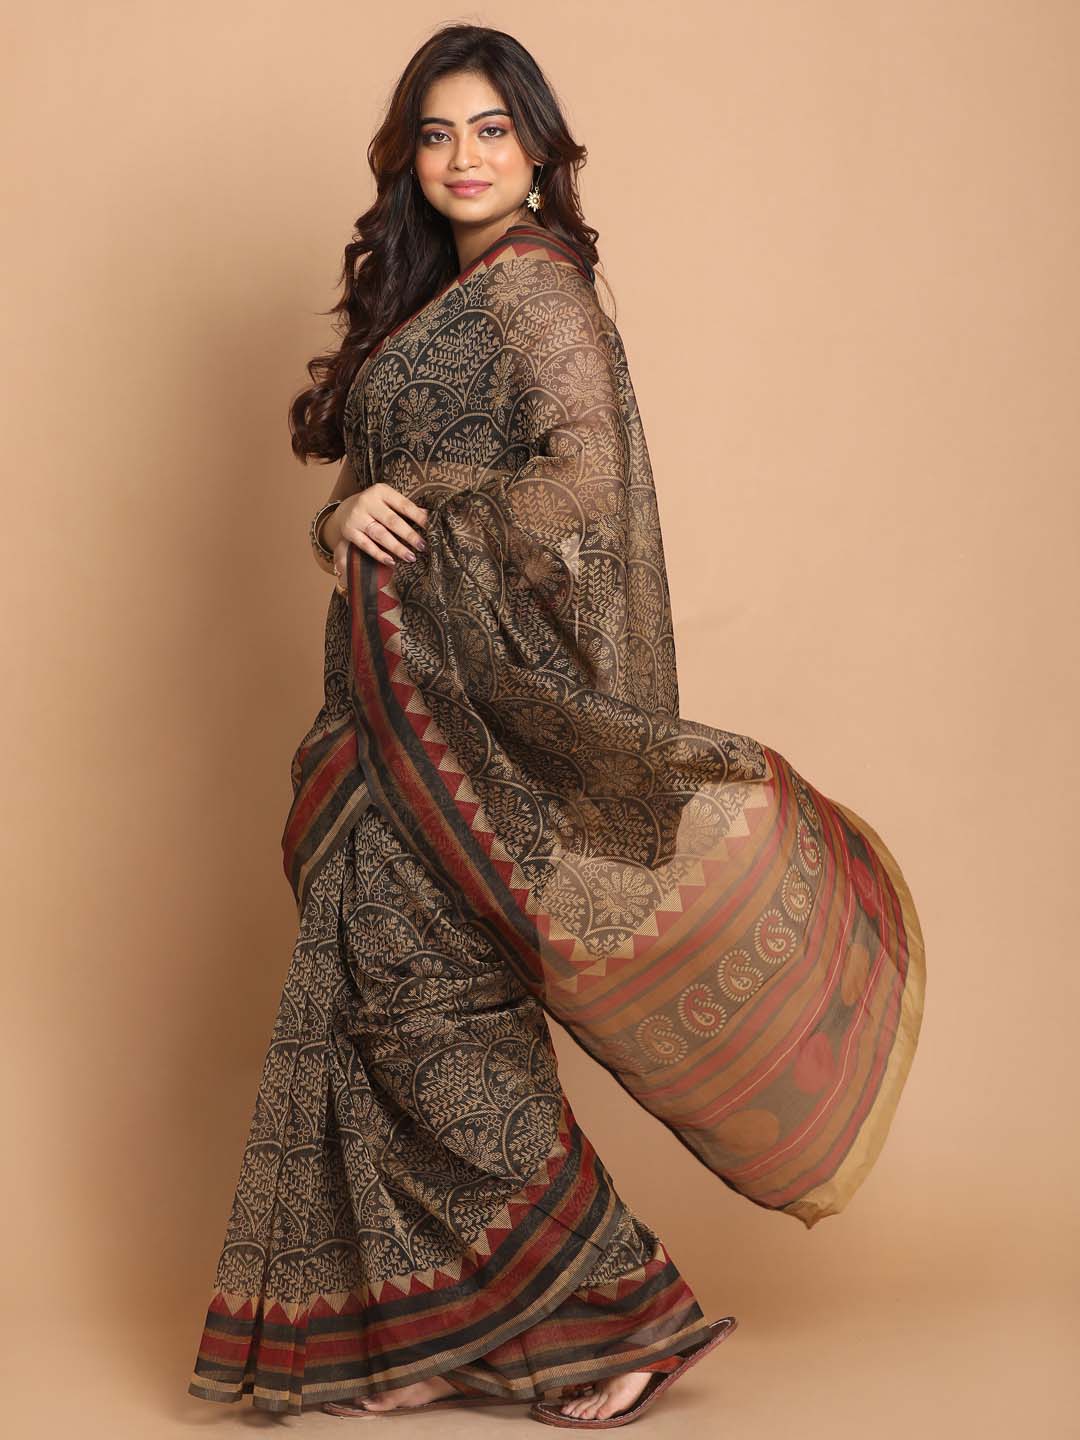 Indethnic Printed Cotton Blend Saree in Gold - View 1